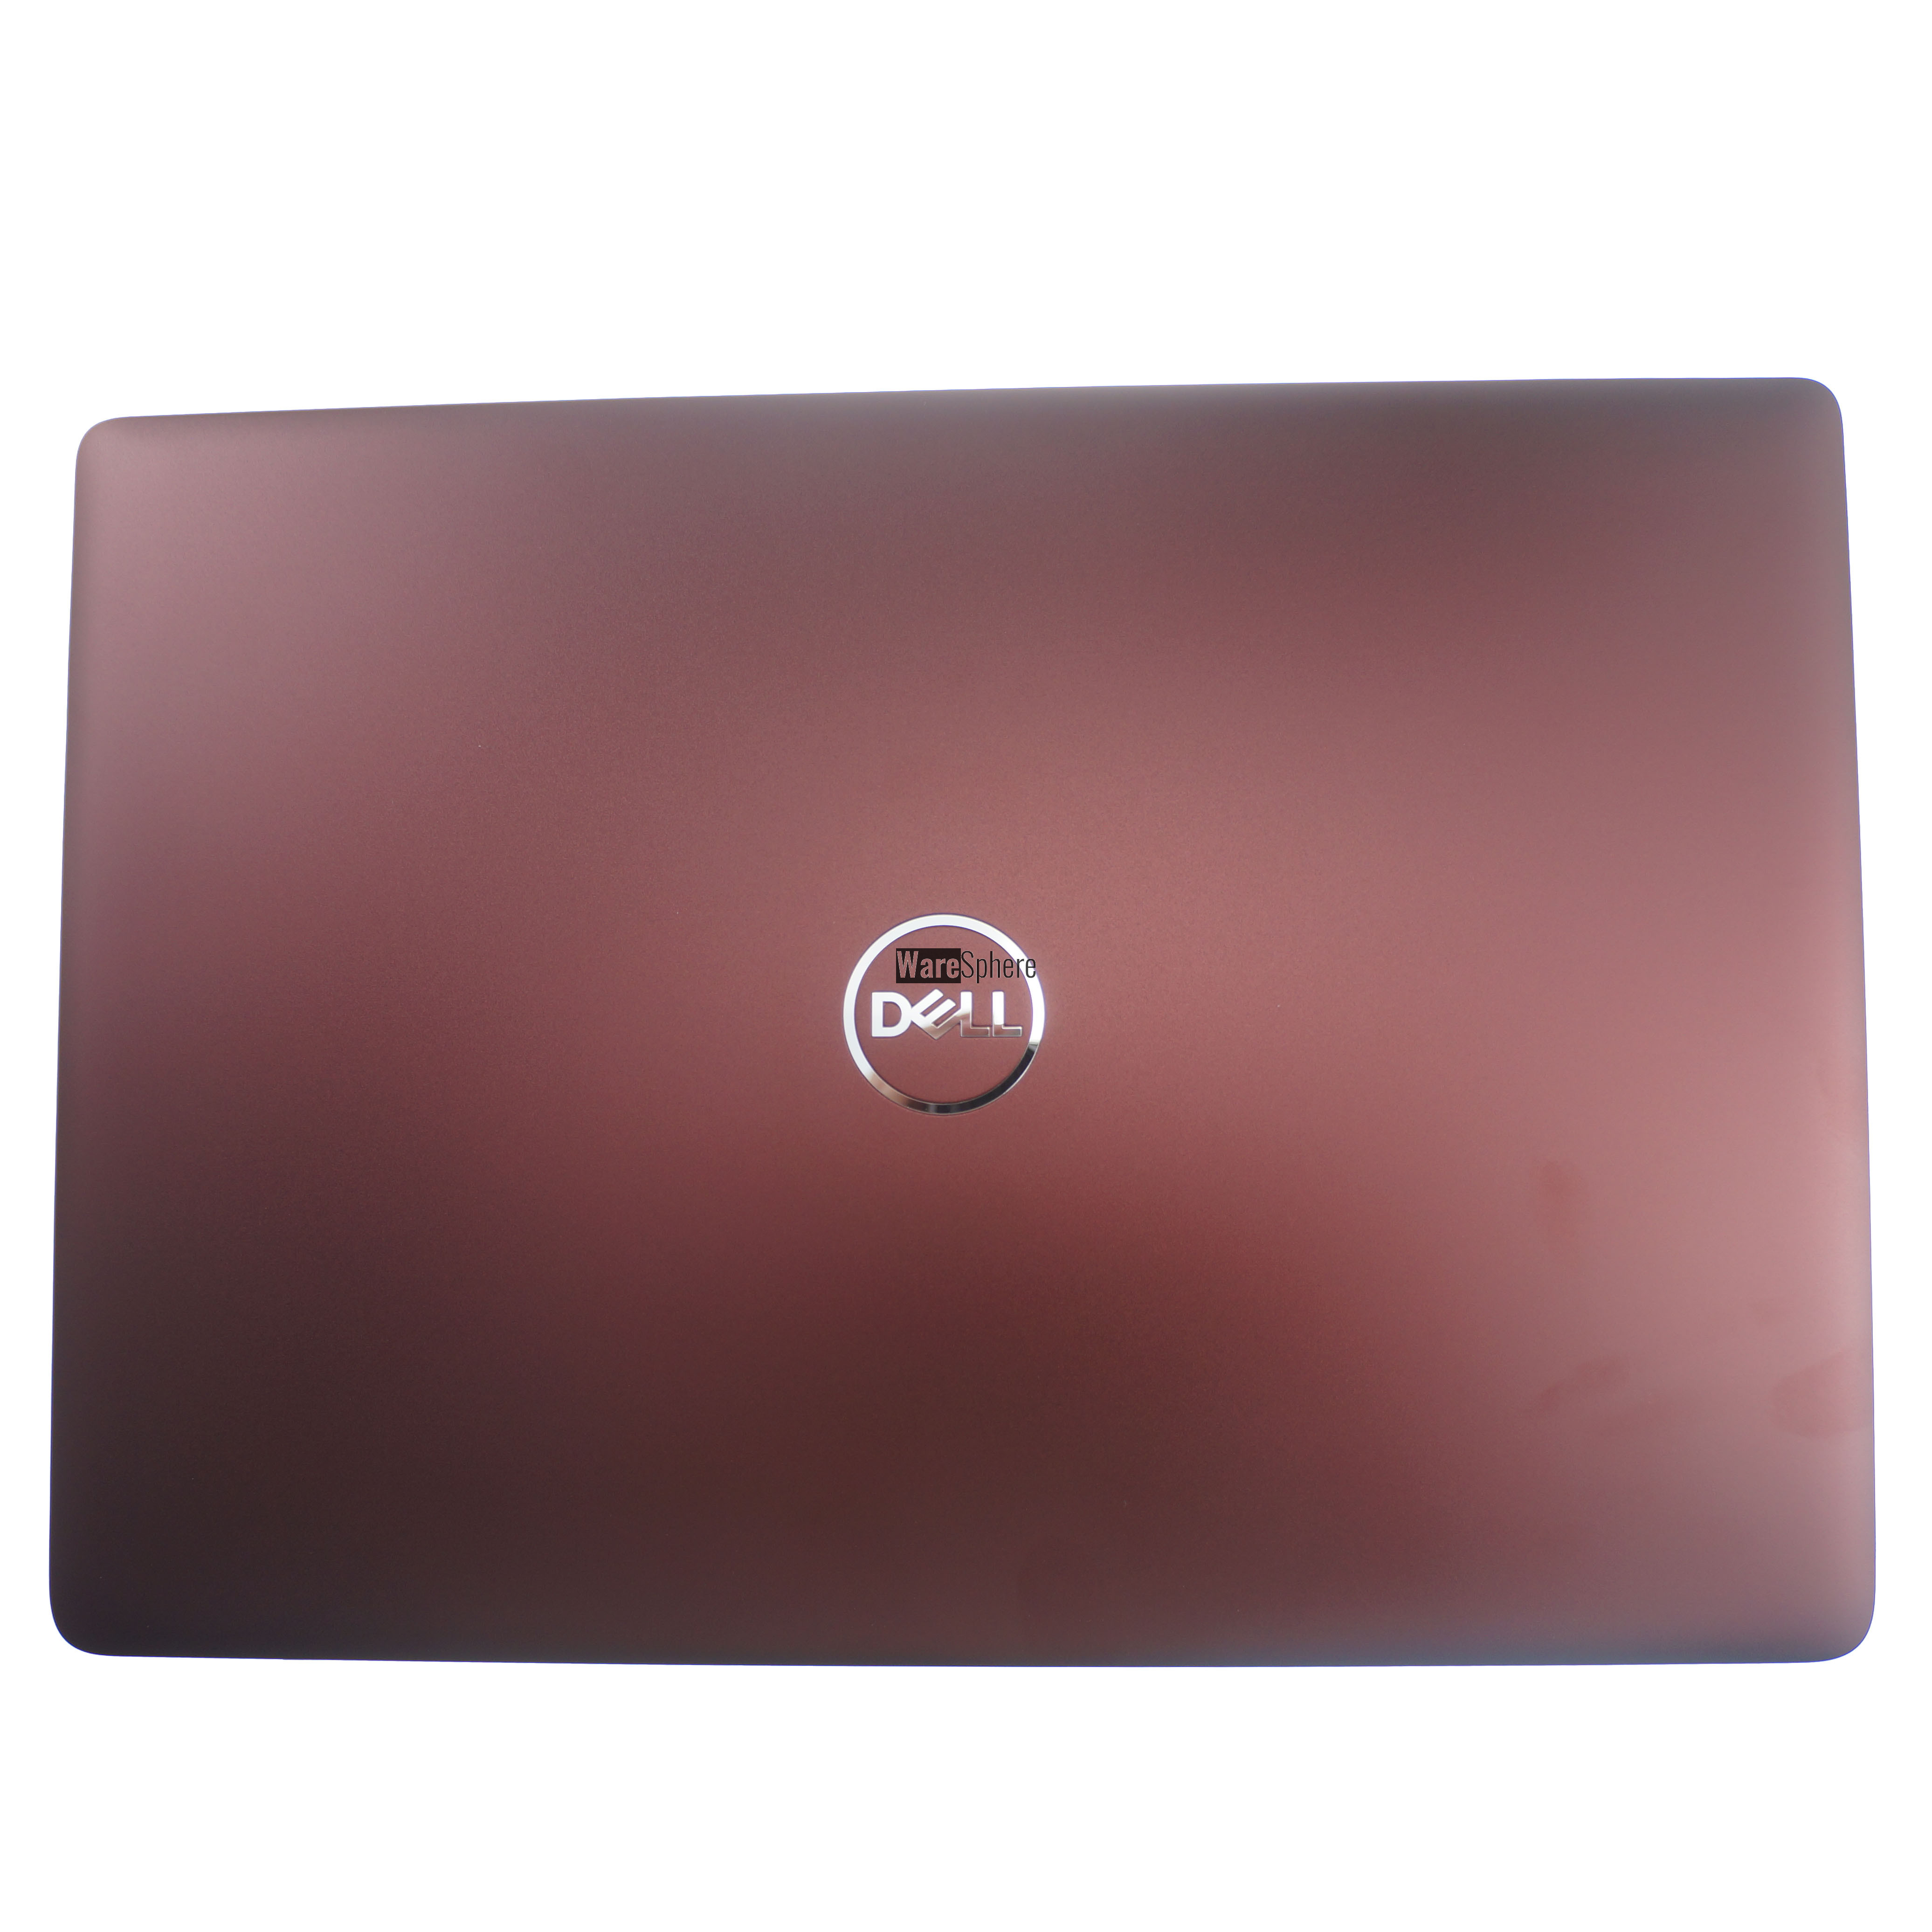 LCD Back Cover For Dell Inspiron 14 5480 JGVY9 0JGVY9 4600F7070002 Red